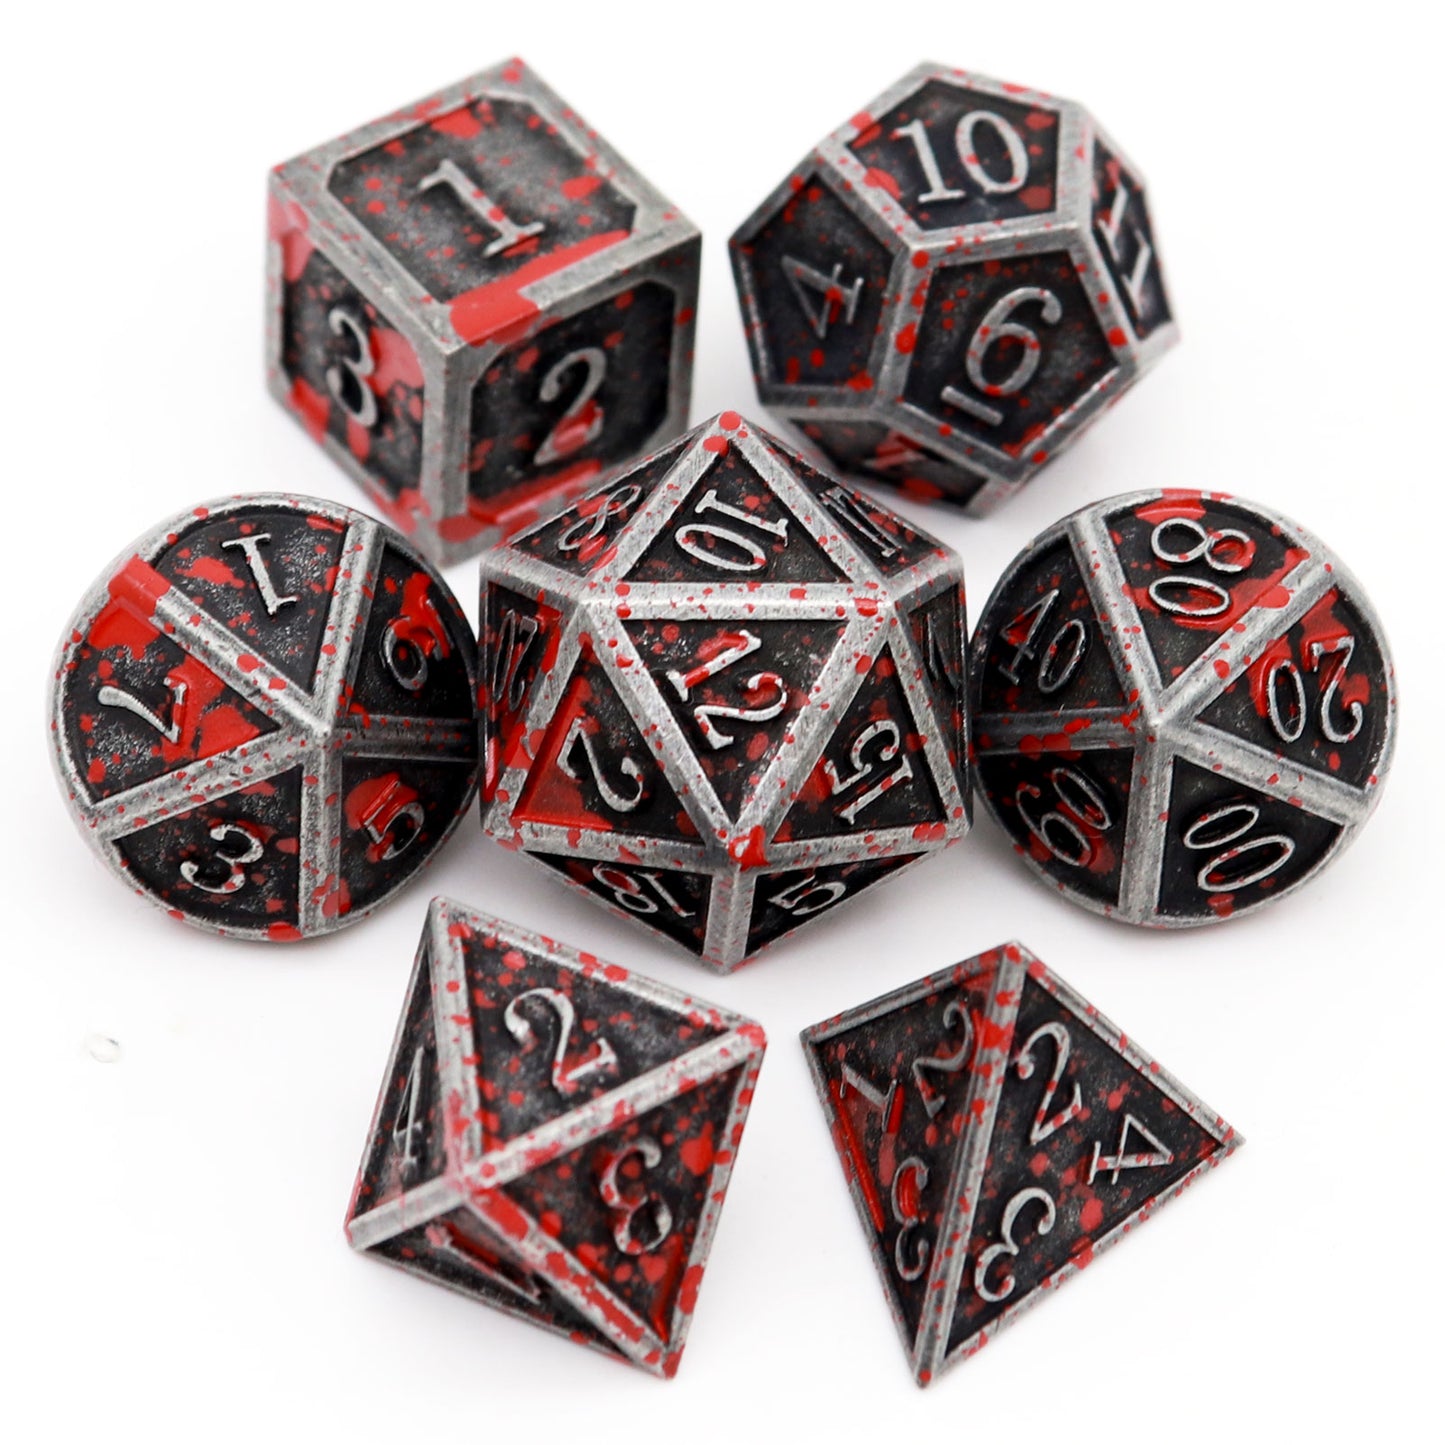 Haxtec Bloodstained Metal Dice Set D&D for DND Game-Antique Iron